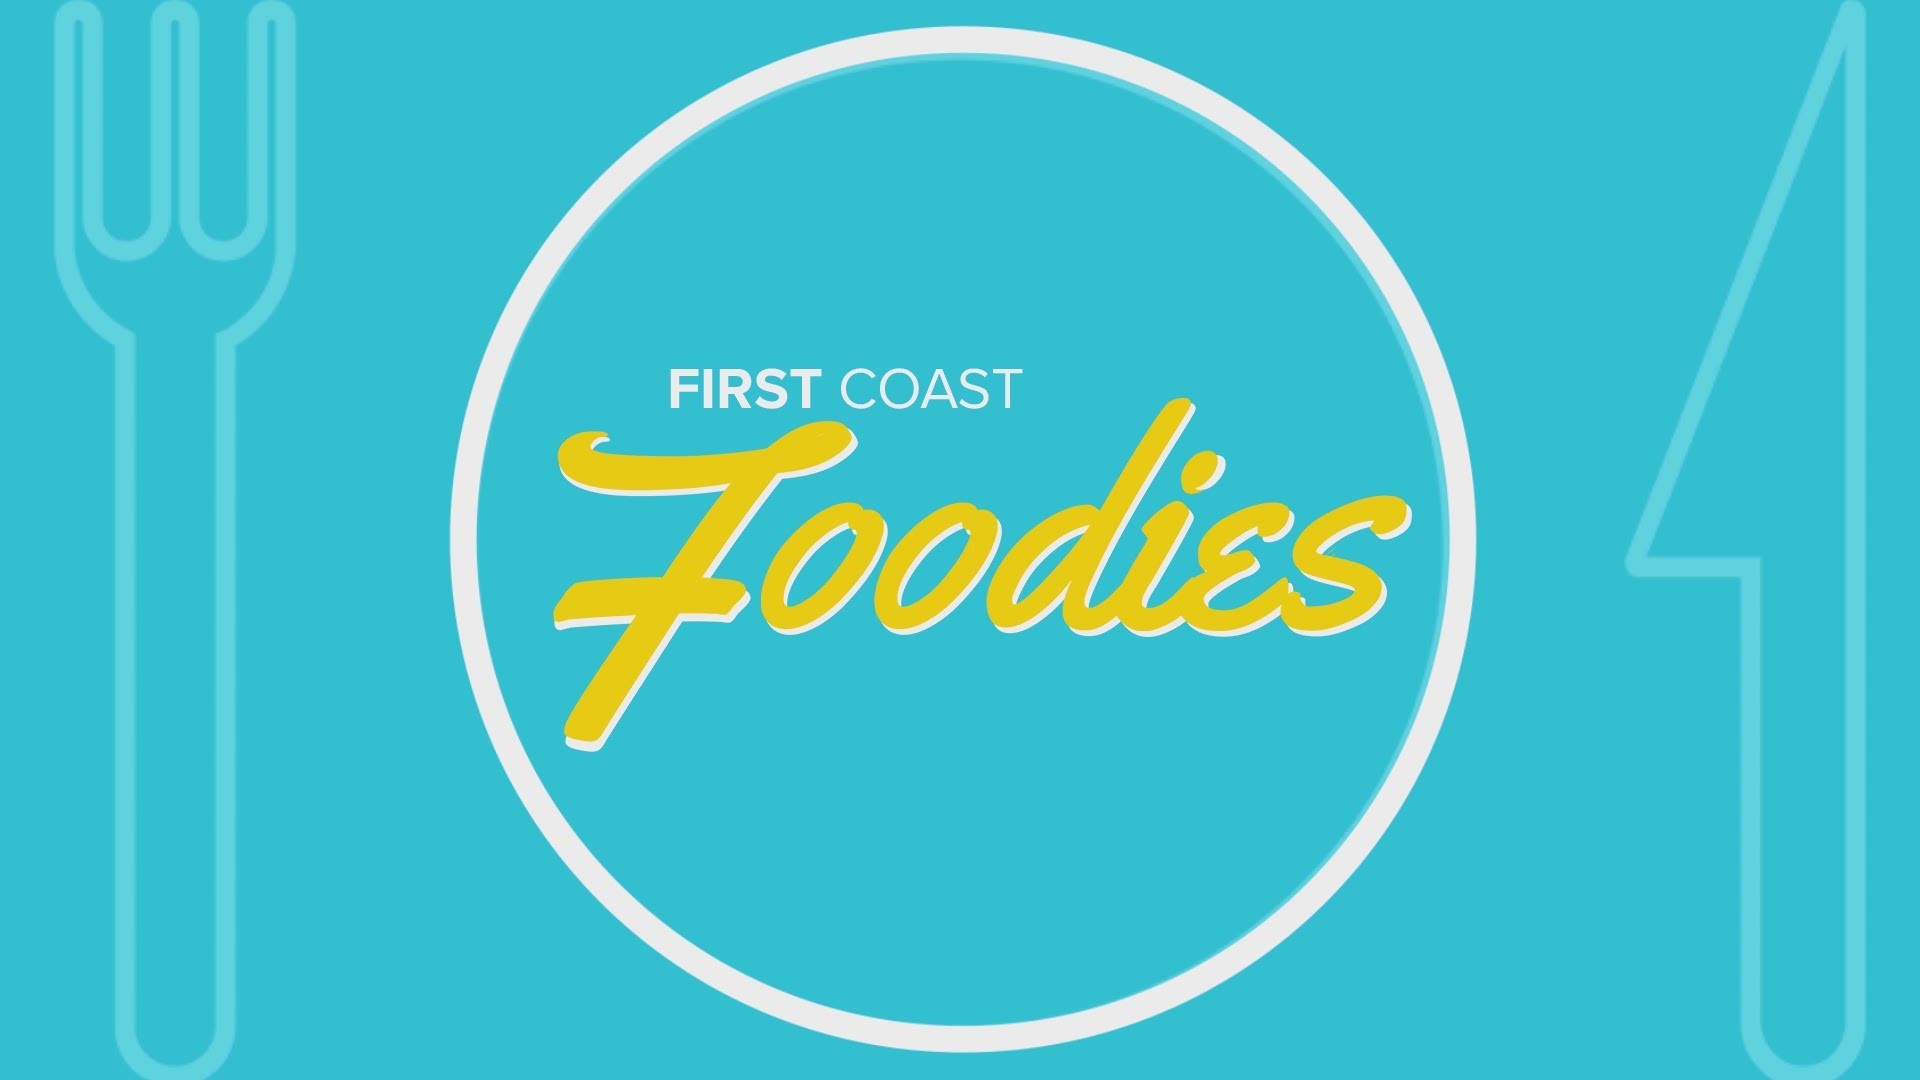 You've seen the prep, now First Coast Foodies is sharing the story behind how Clark's Fish Camp on Julington Creek started serving full smoked alligator, one of its many exotic items.